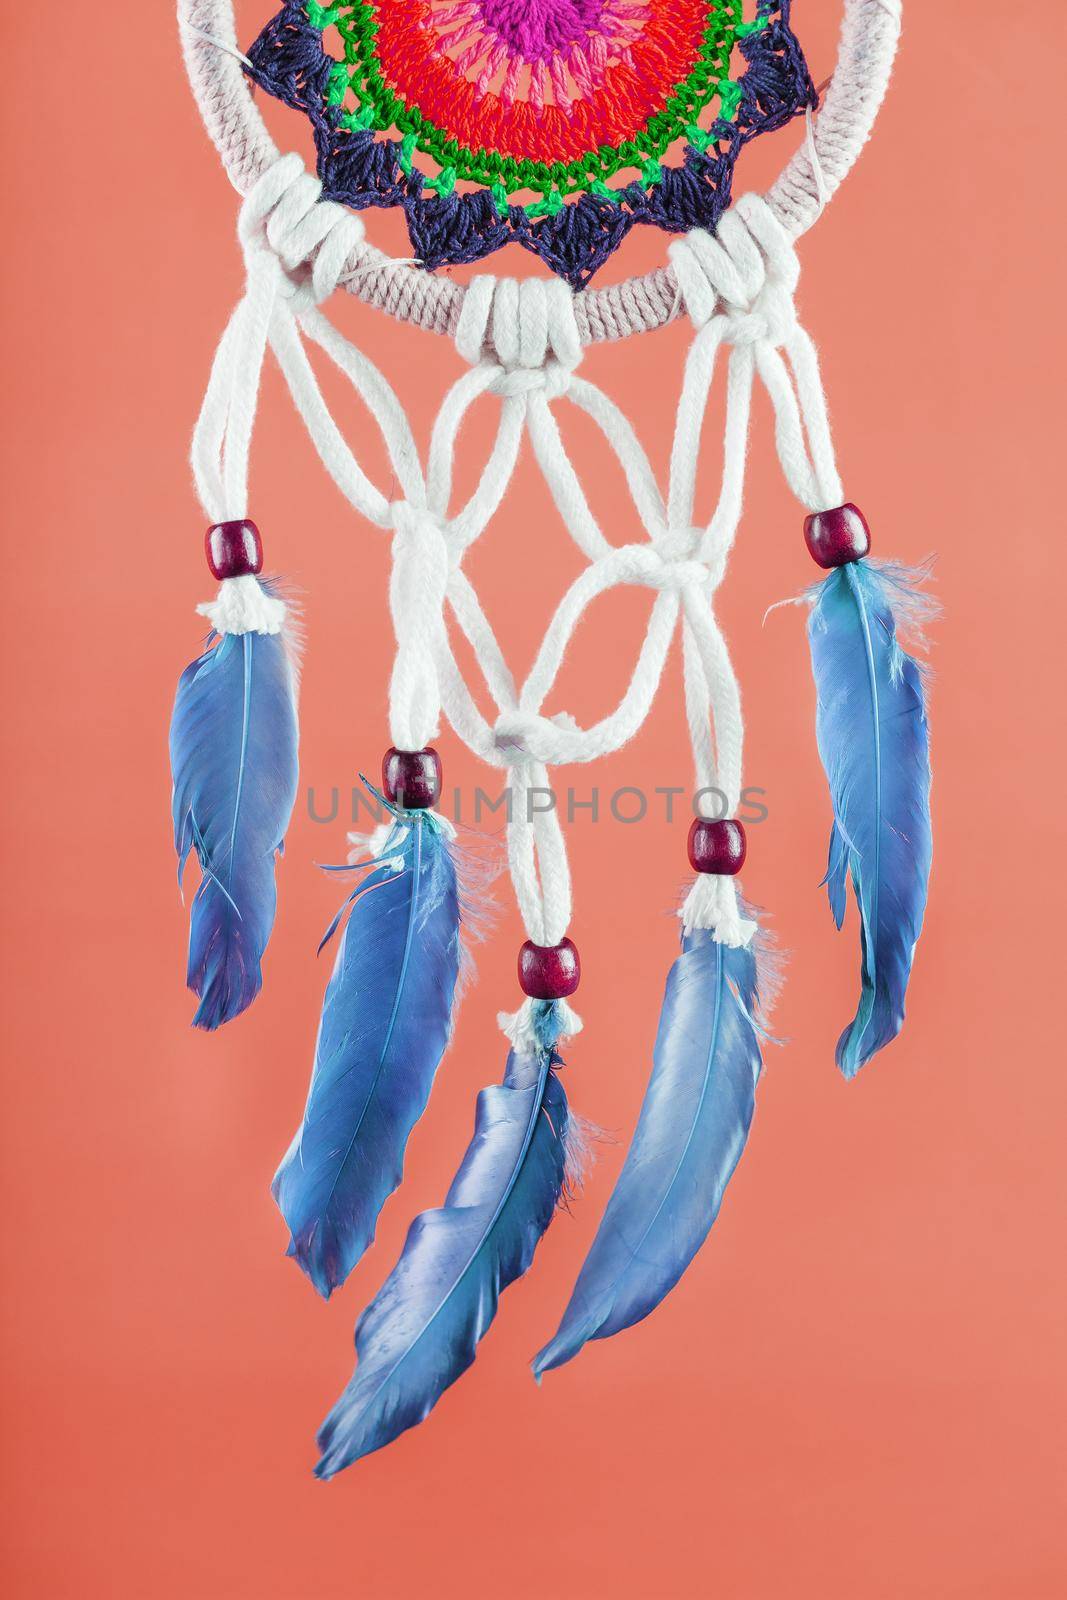 Amulet Dreamcatcher on a red background close-up protecting the sleeper from evil spirits and diseases